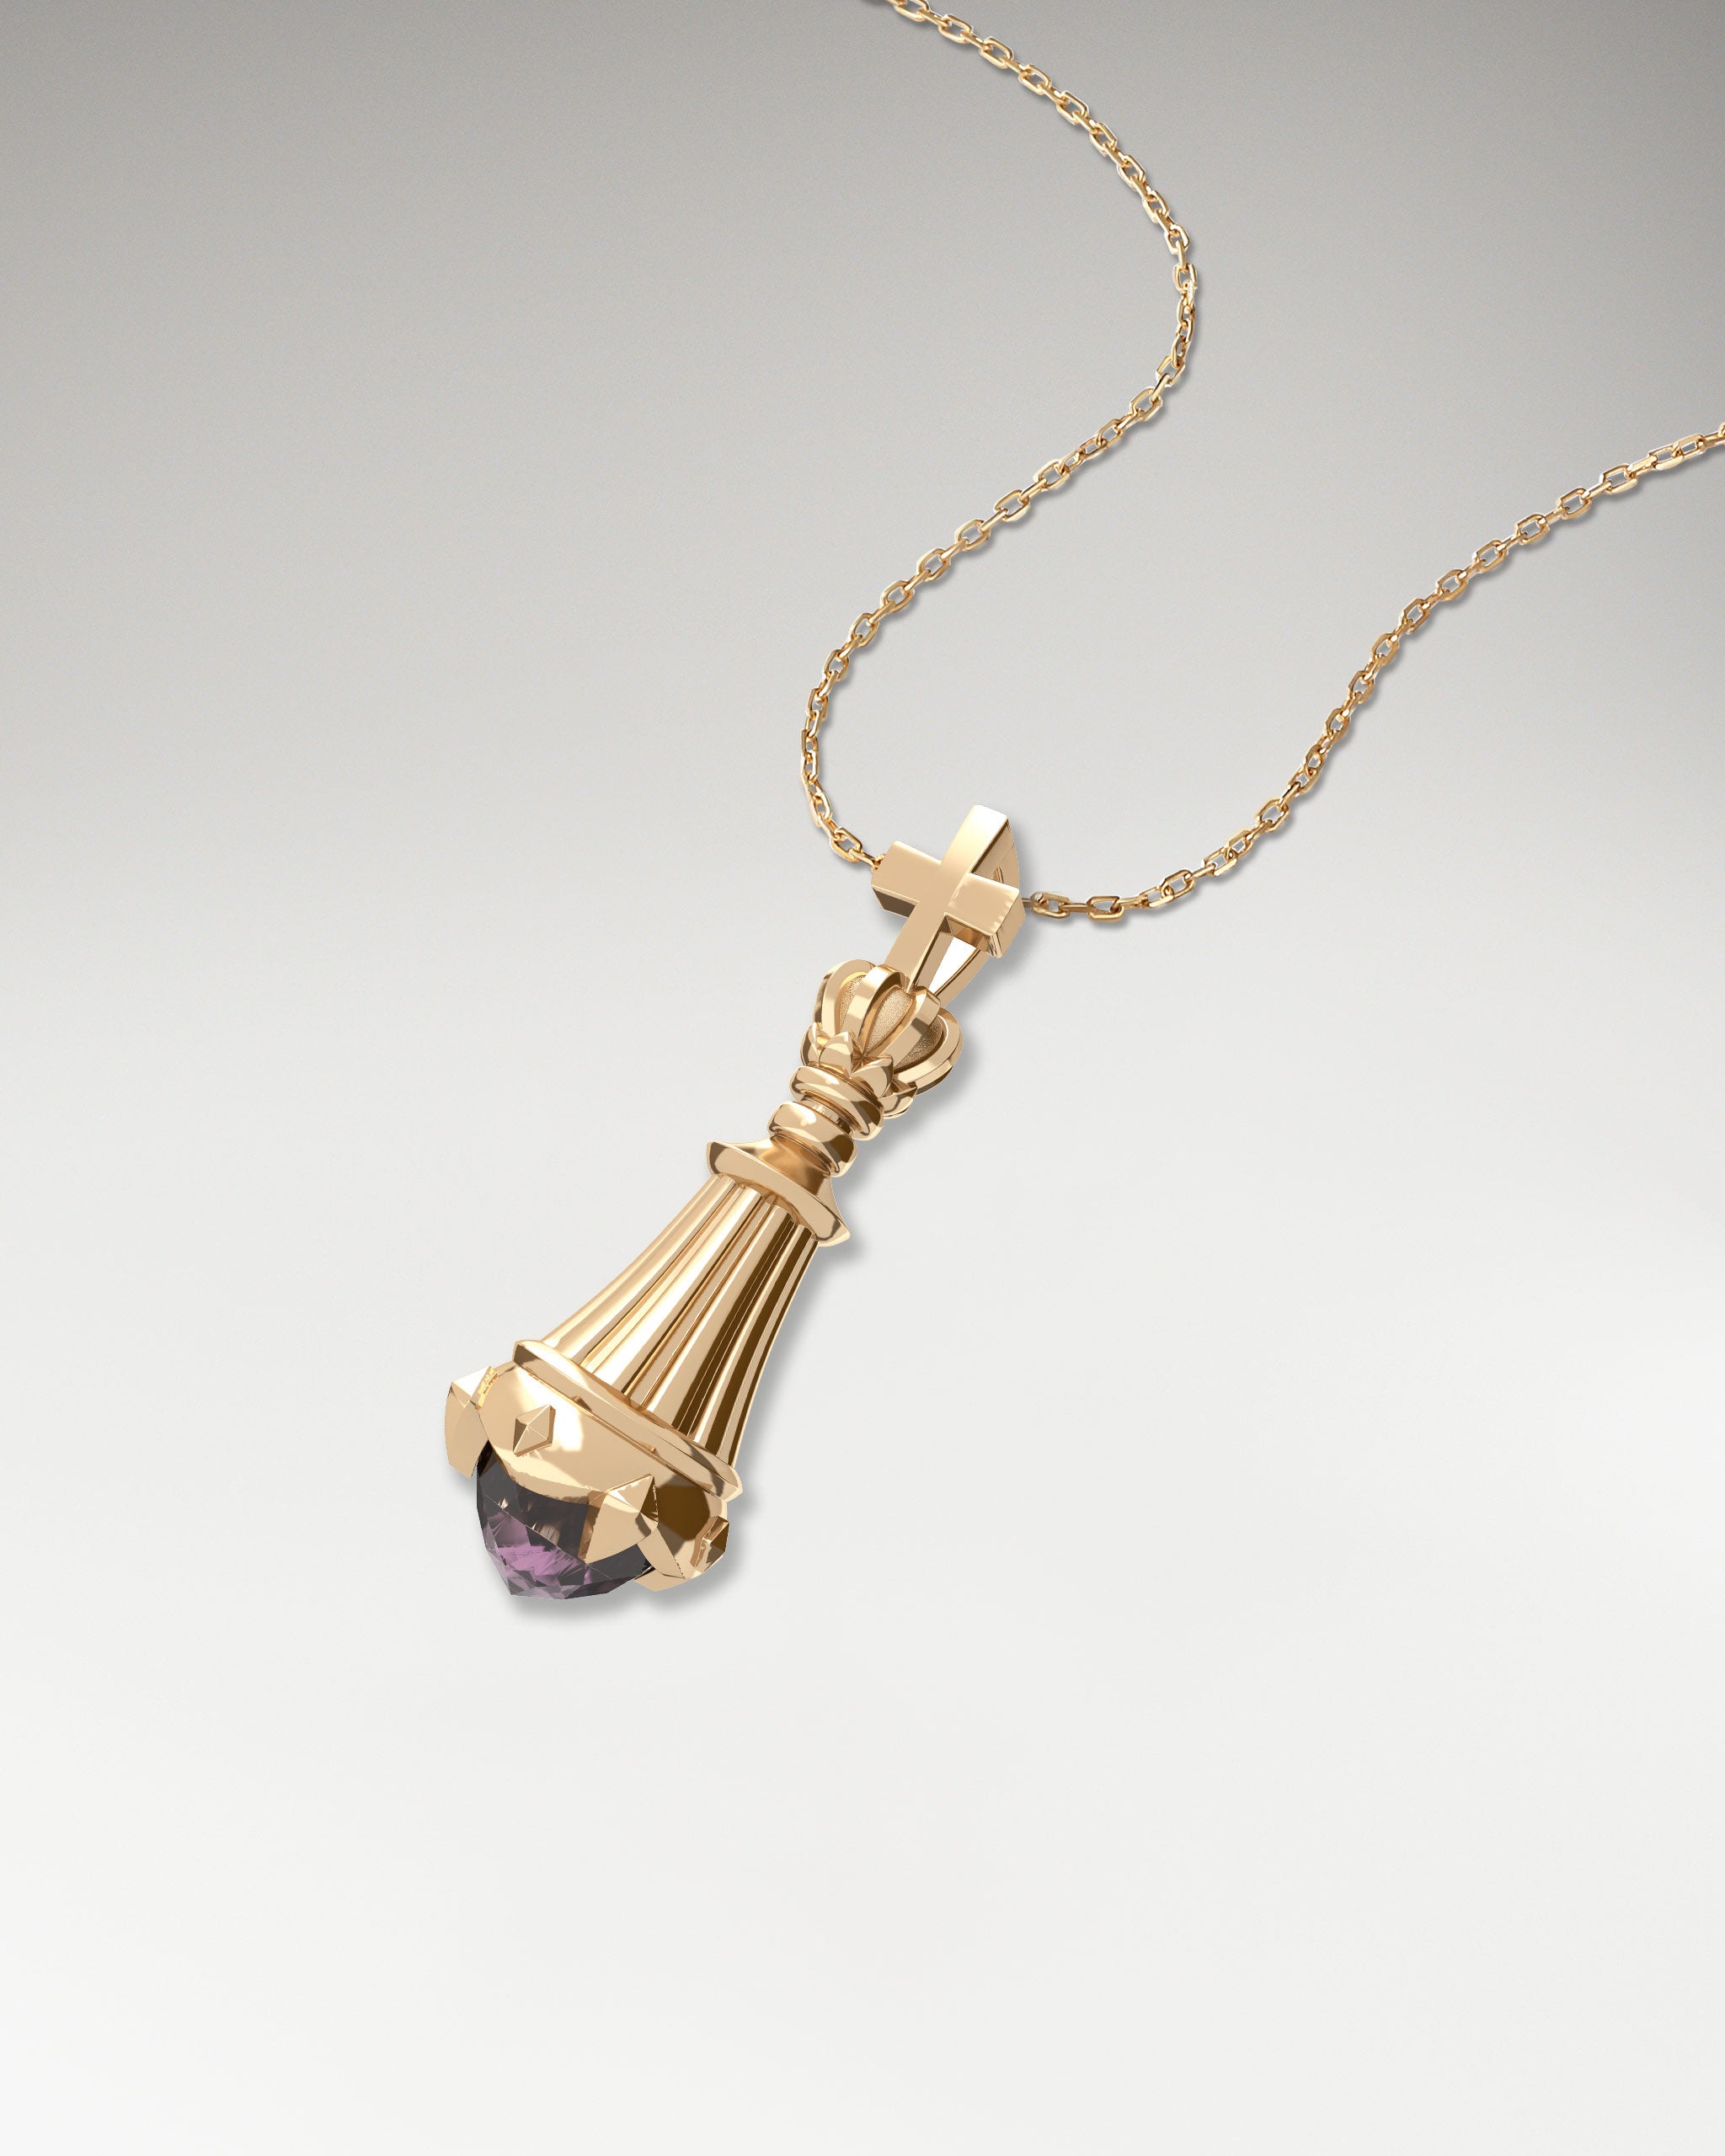 King CHess Necklace in gold with spinel